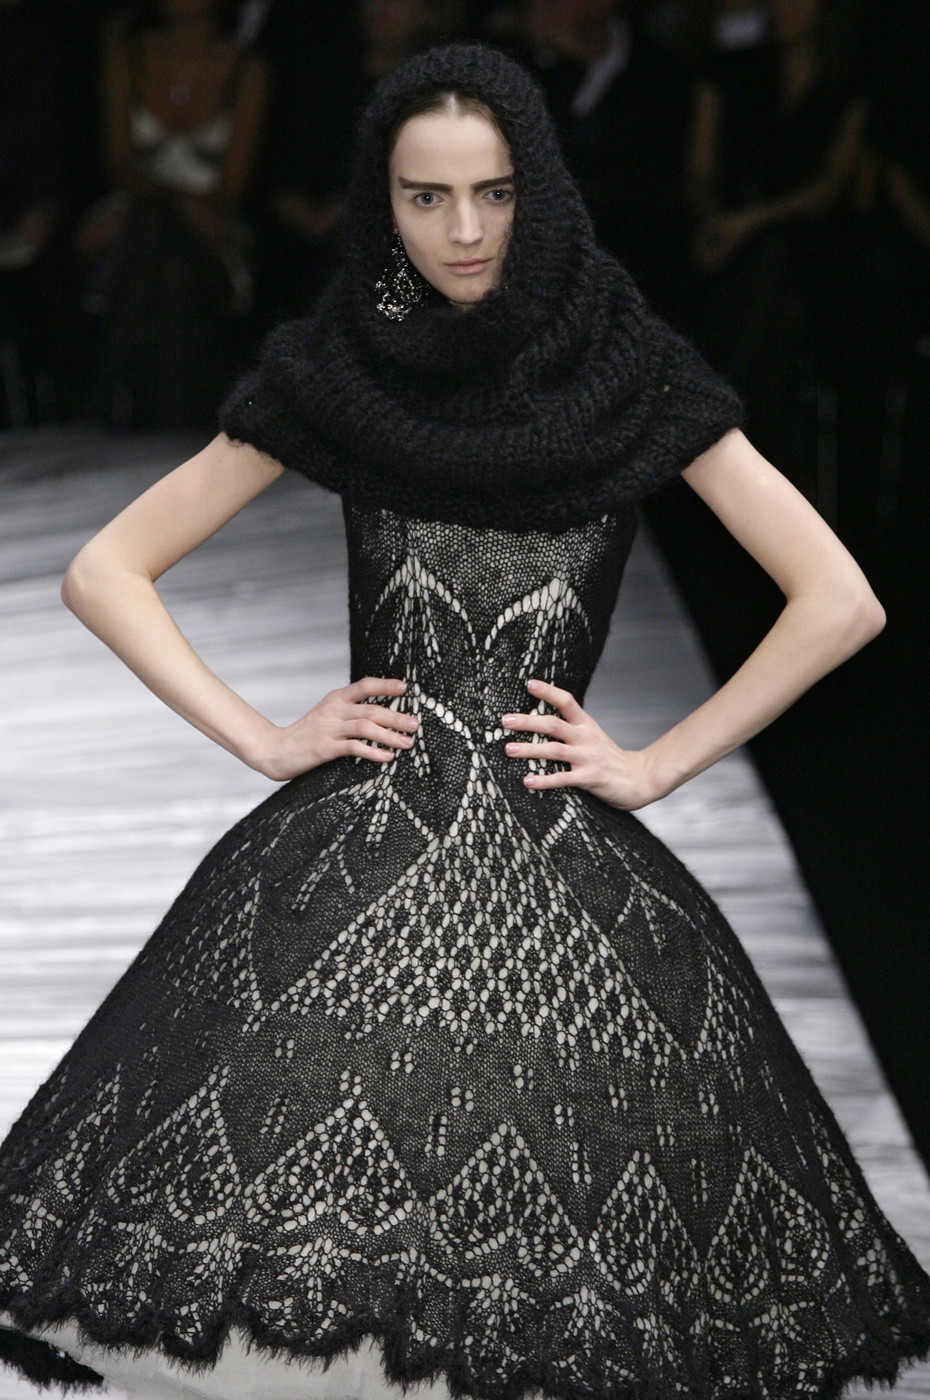 Style of Westeros - Lady Stoneheart - Alexander McQueen fall 2008